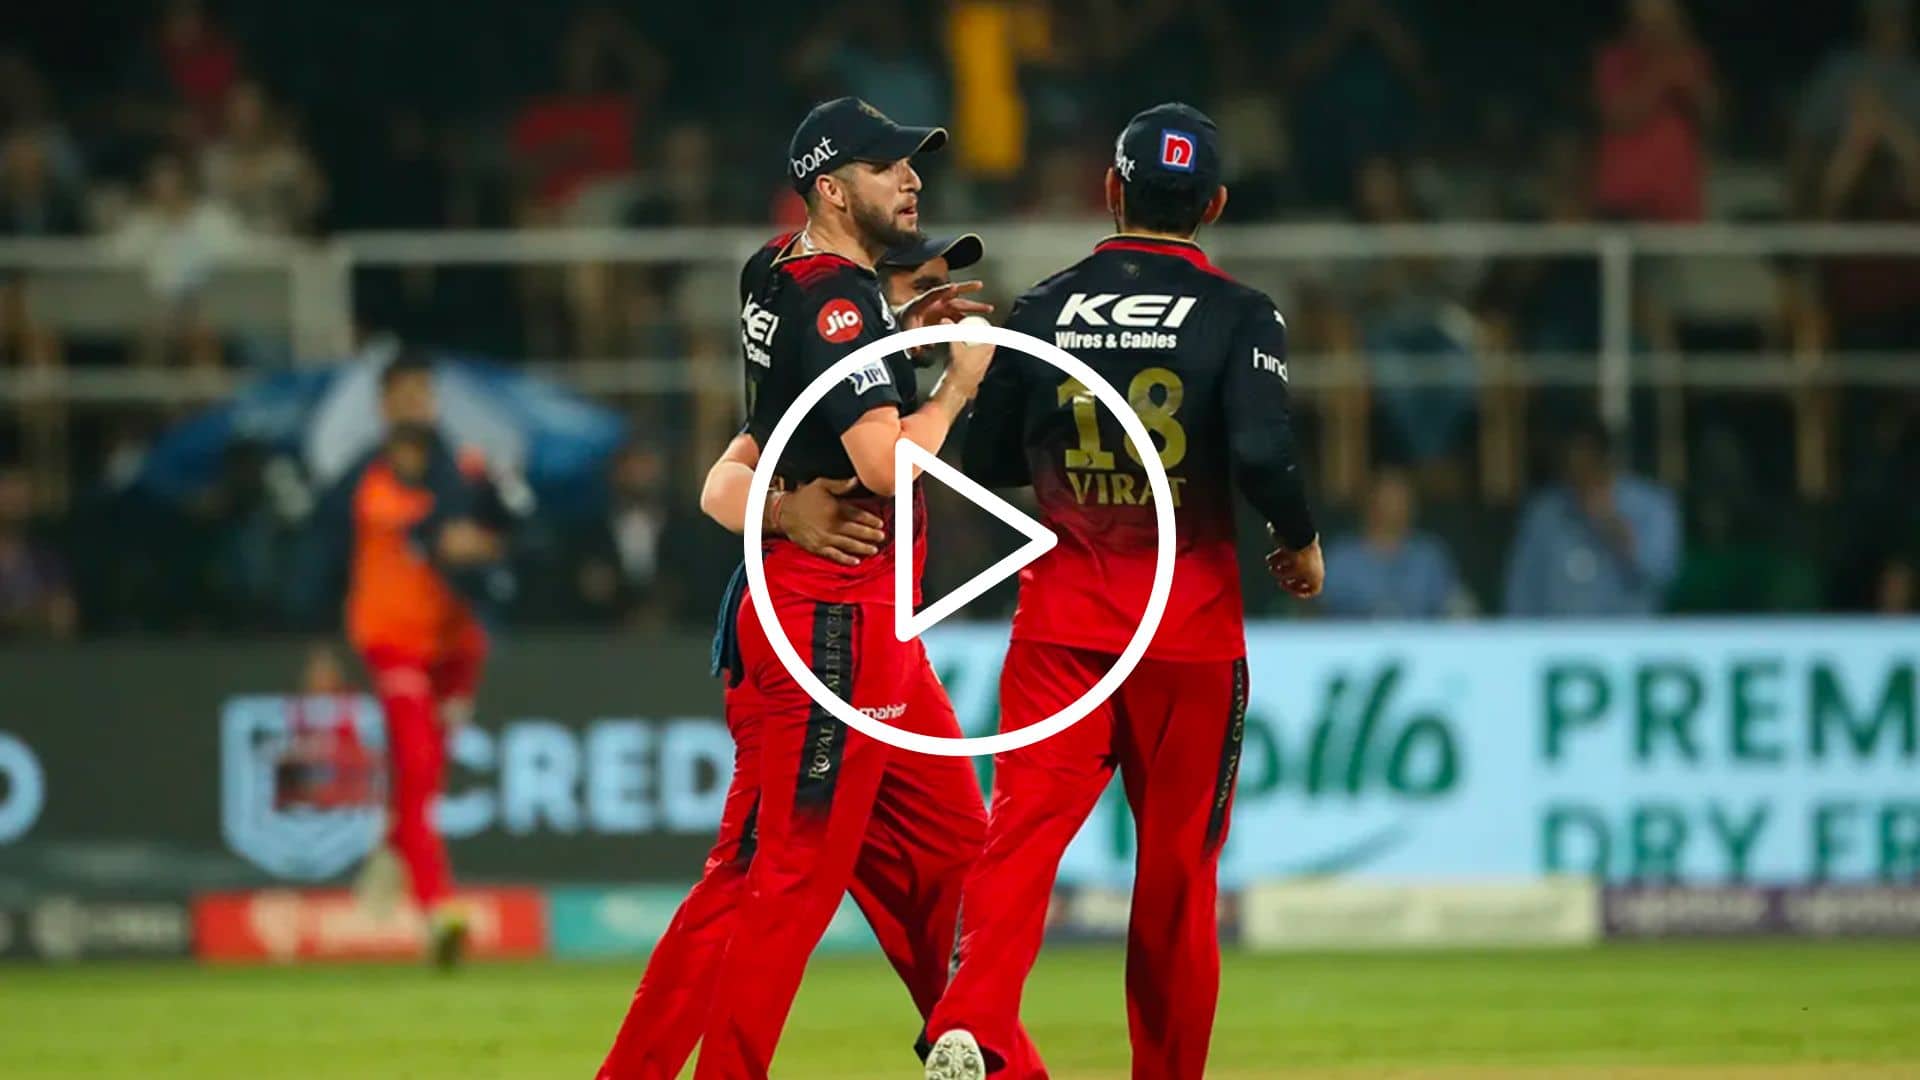 [Watch] Wayne Parnell Plucks Wicket for Siraj; Becomes Catch of the Tournament Contender